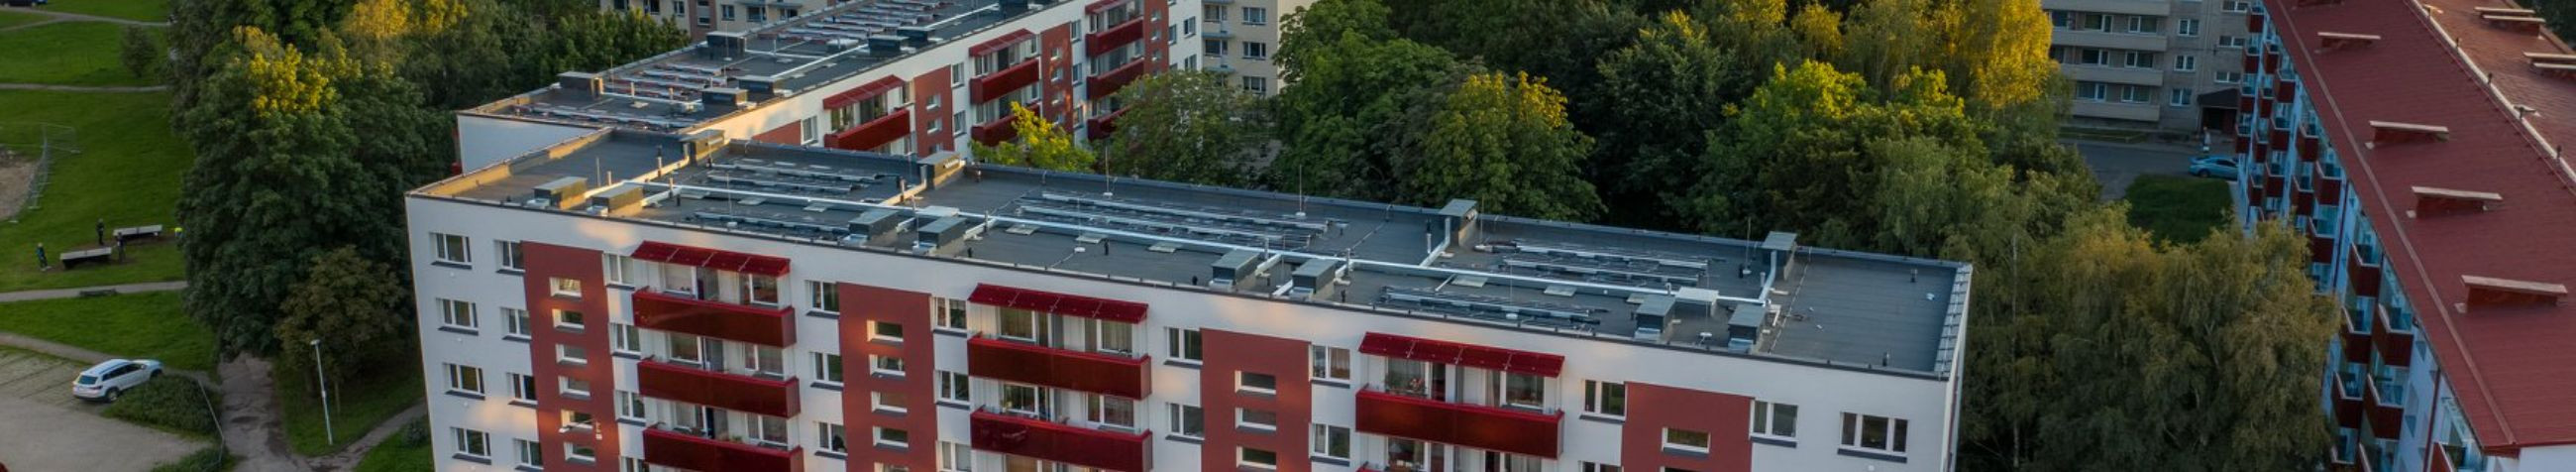 Design, manufacture of air conditioners, renewable heating, energy efficiency consultancy services, reconstruction of apartment buildings, technological ventilation systems, ventilation equipment, innovative heatcatcher, renewable heating solutions, energy efficiency consulting